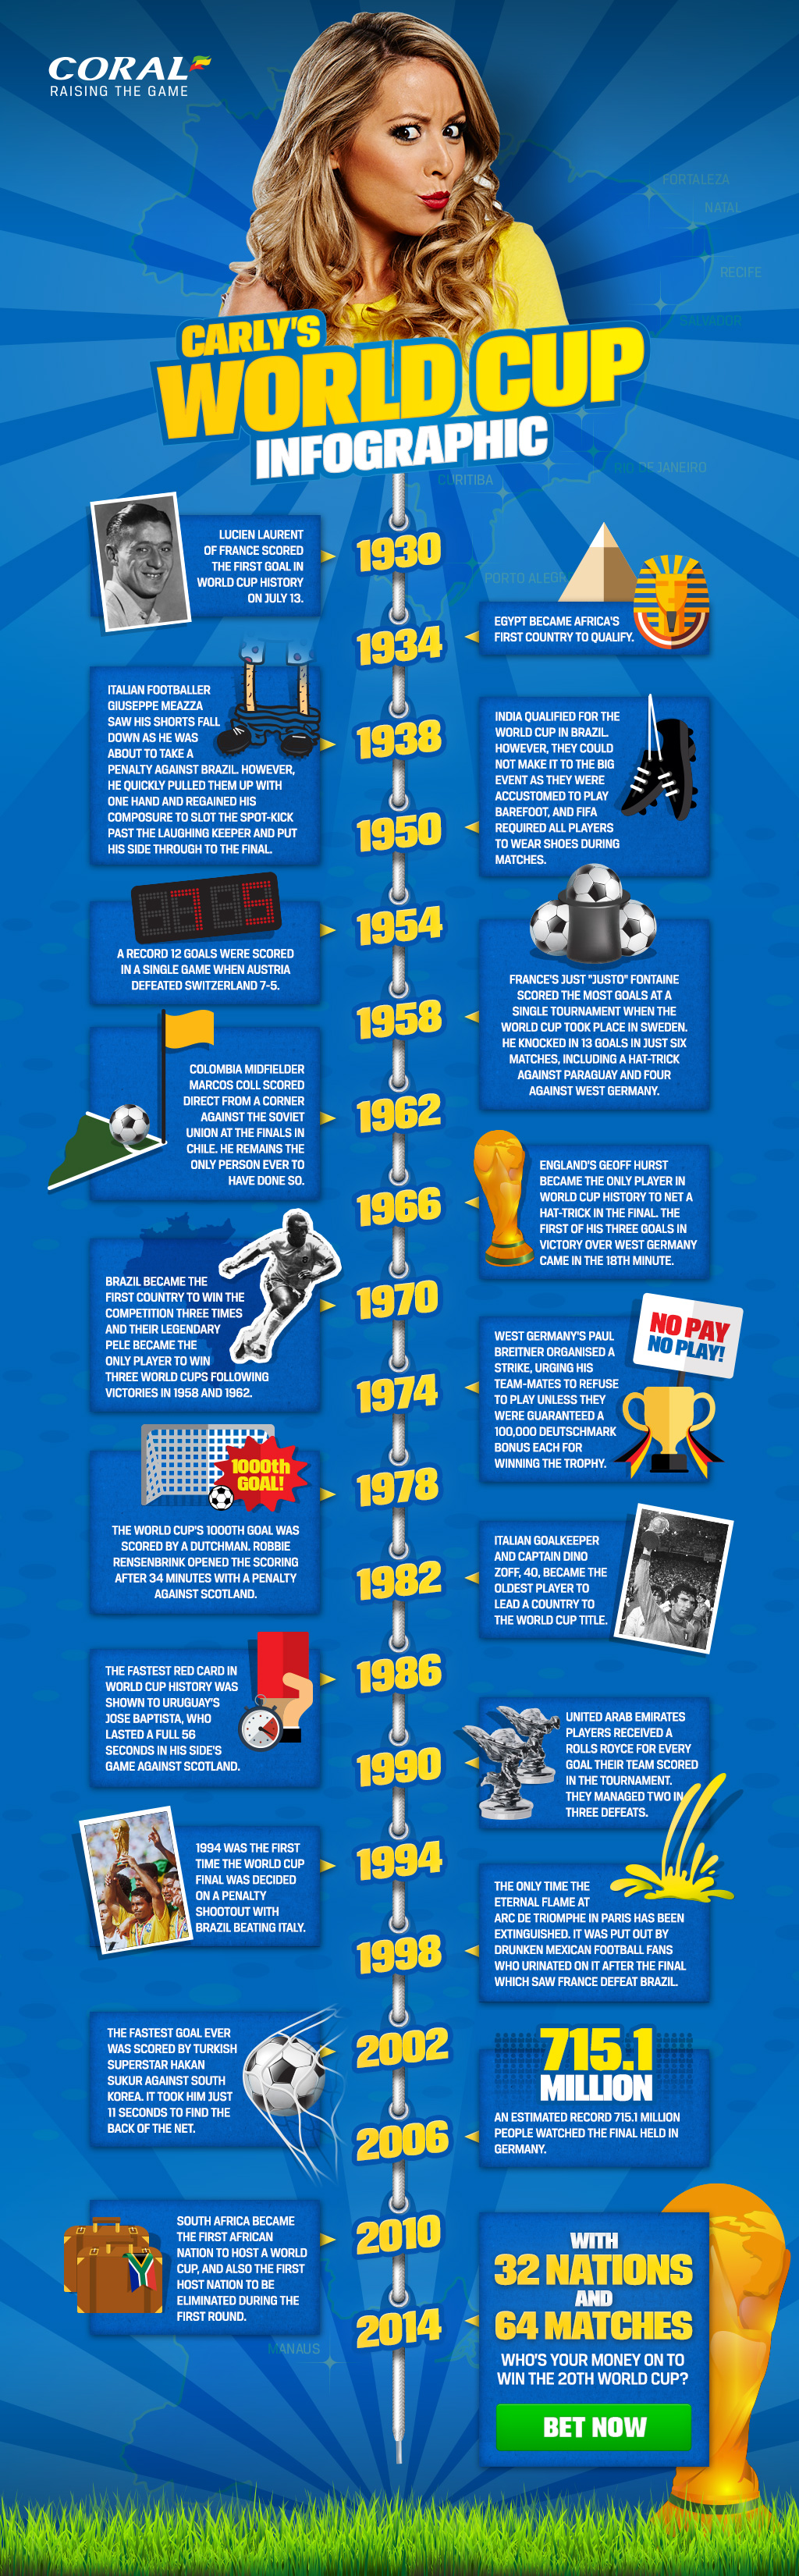 World-Cup-Infographic-Updated